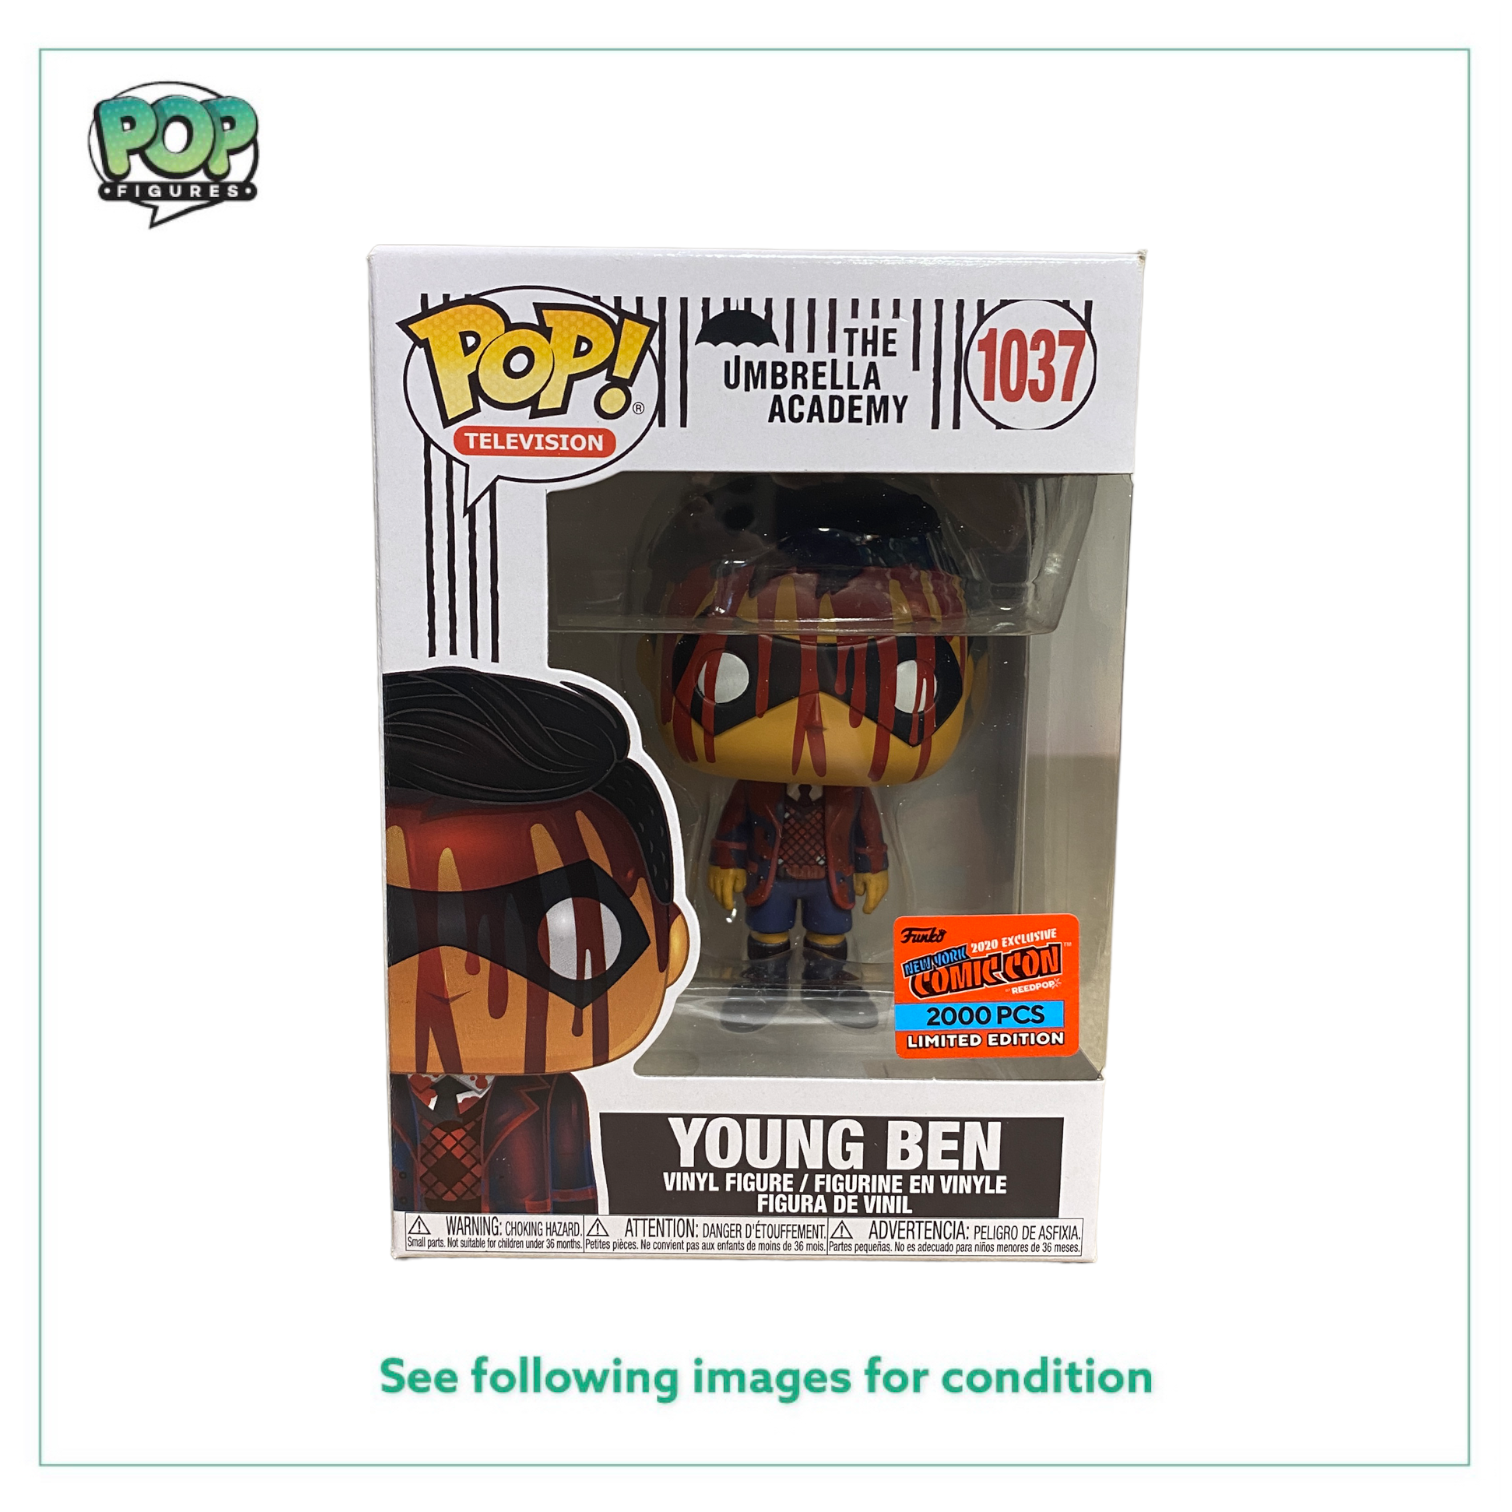 Young Ben #1037 (Bloody) Funko Pop! - The Umbrella Academy - NYCC 2020 Exclusive LE2000 Pcs - Condition 8.75/10